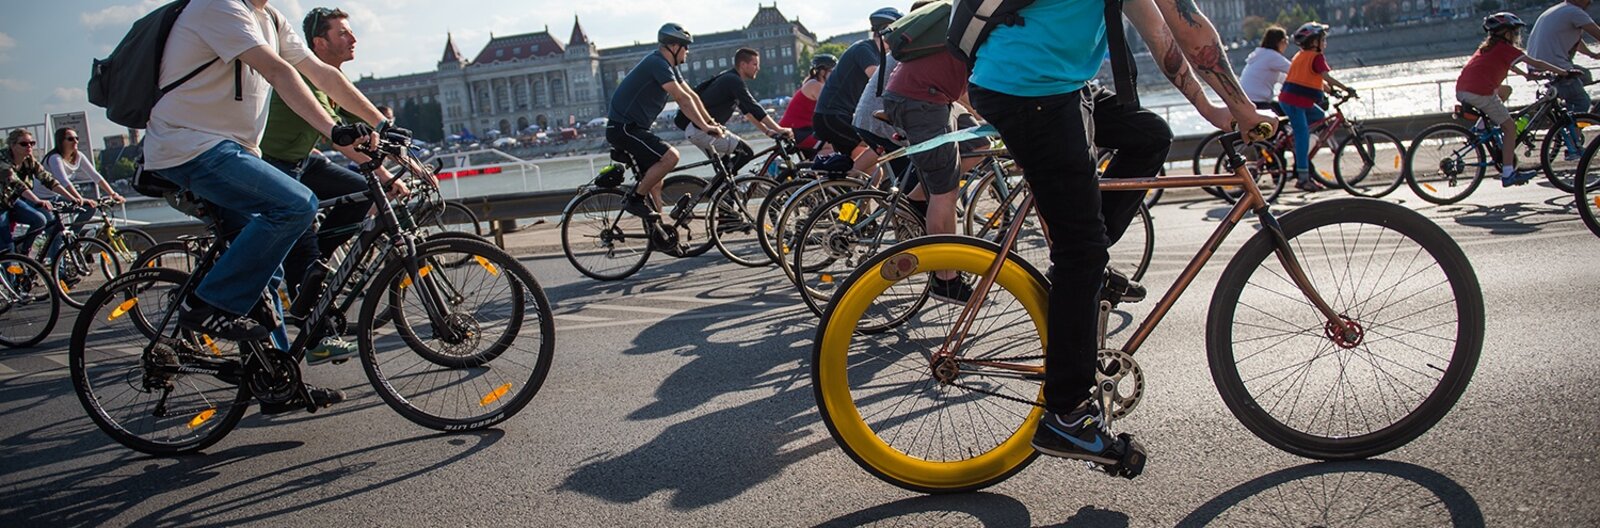 7 Budapest tour companies offering guided bike rides